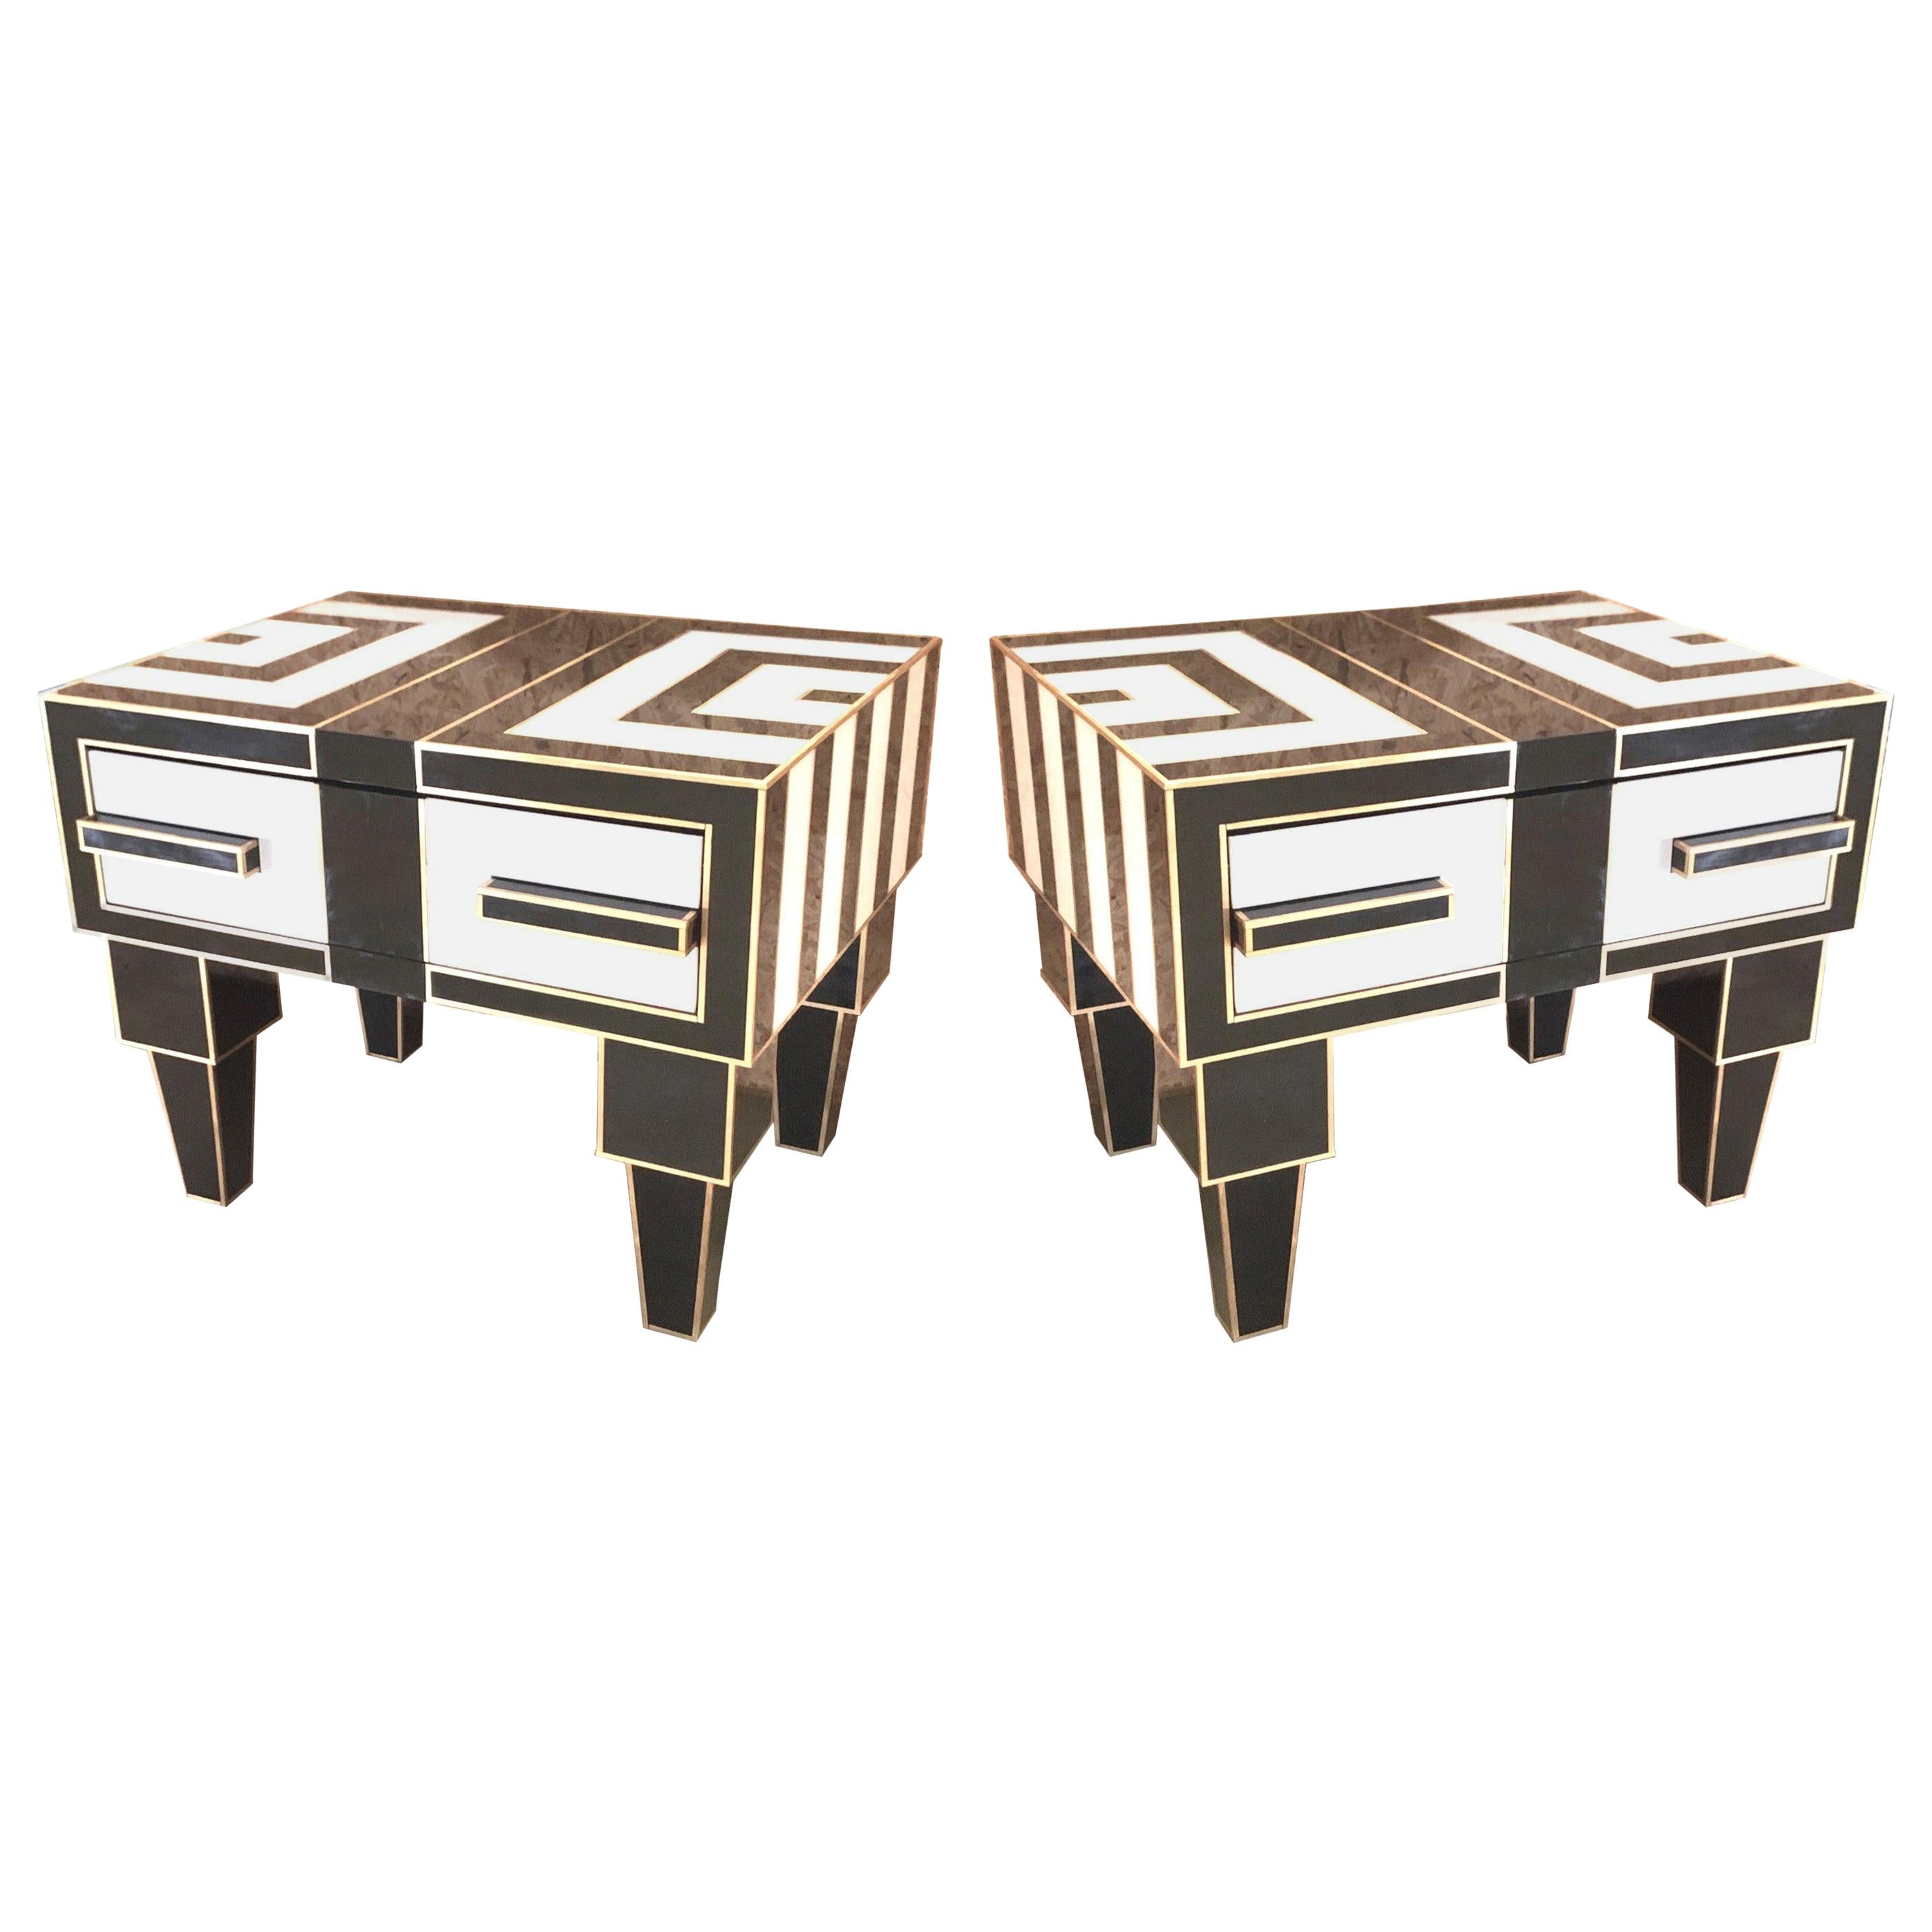 Pair of Mirrored and Brass Nightstands with One-Drawer in Black and White